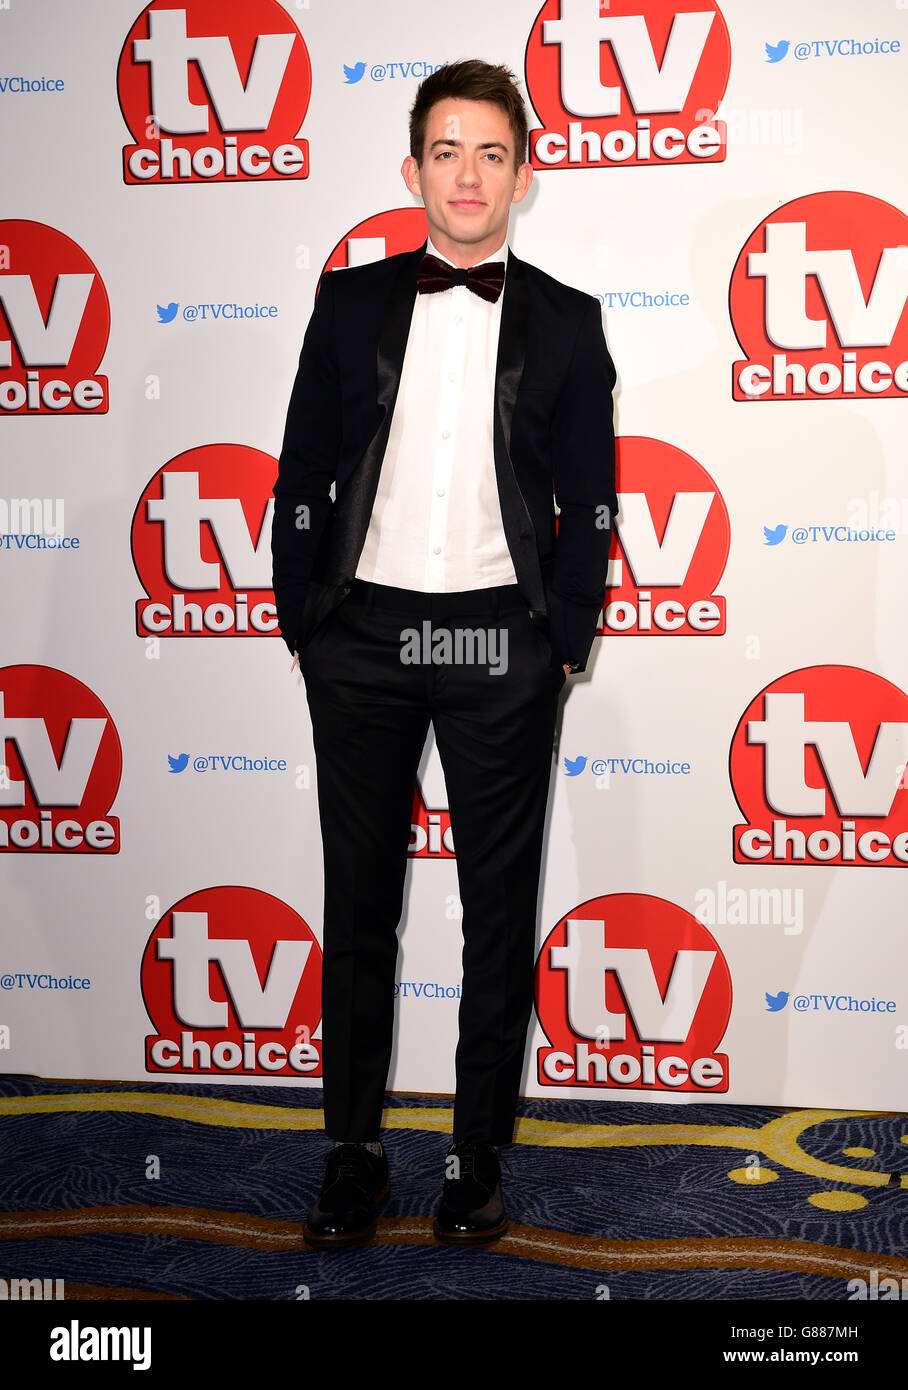 Kevin McHale attending the 2015 TV Choice Awards at the Park Lane Hilton Hotel, London. PRESS ASSOCIATION Photo. Picture date: Monday September 7, 2015. See PA story SHOWBIZ TVChoice. Photo credit should read: Ian West/PA Wire Stock Photo